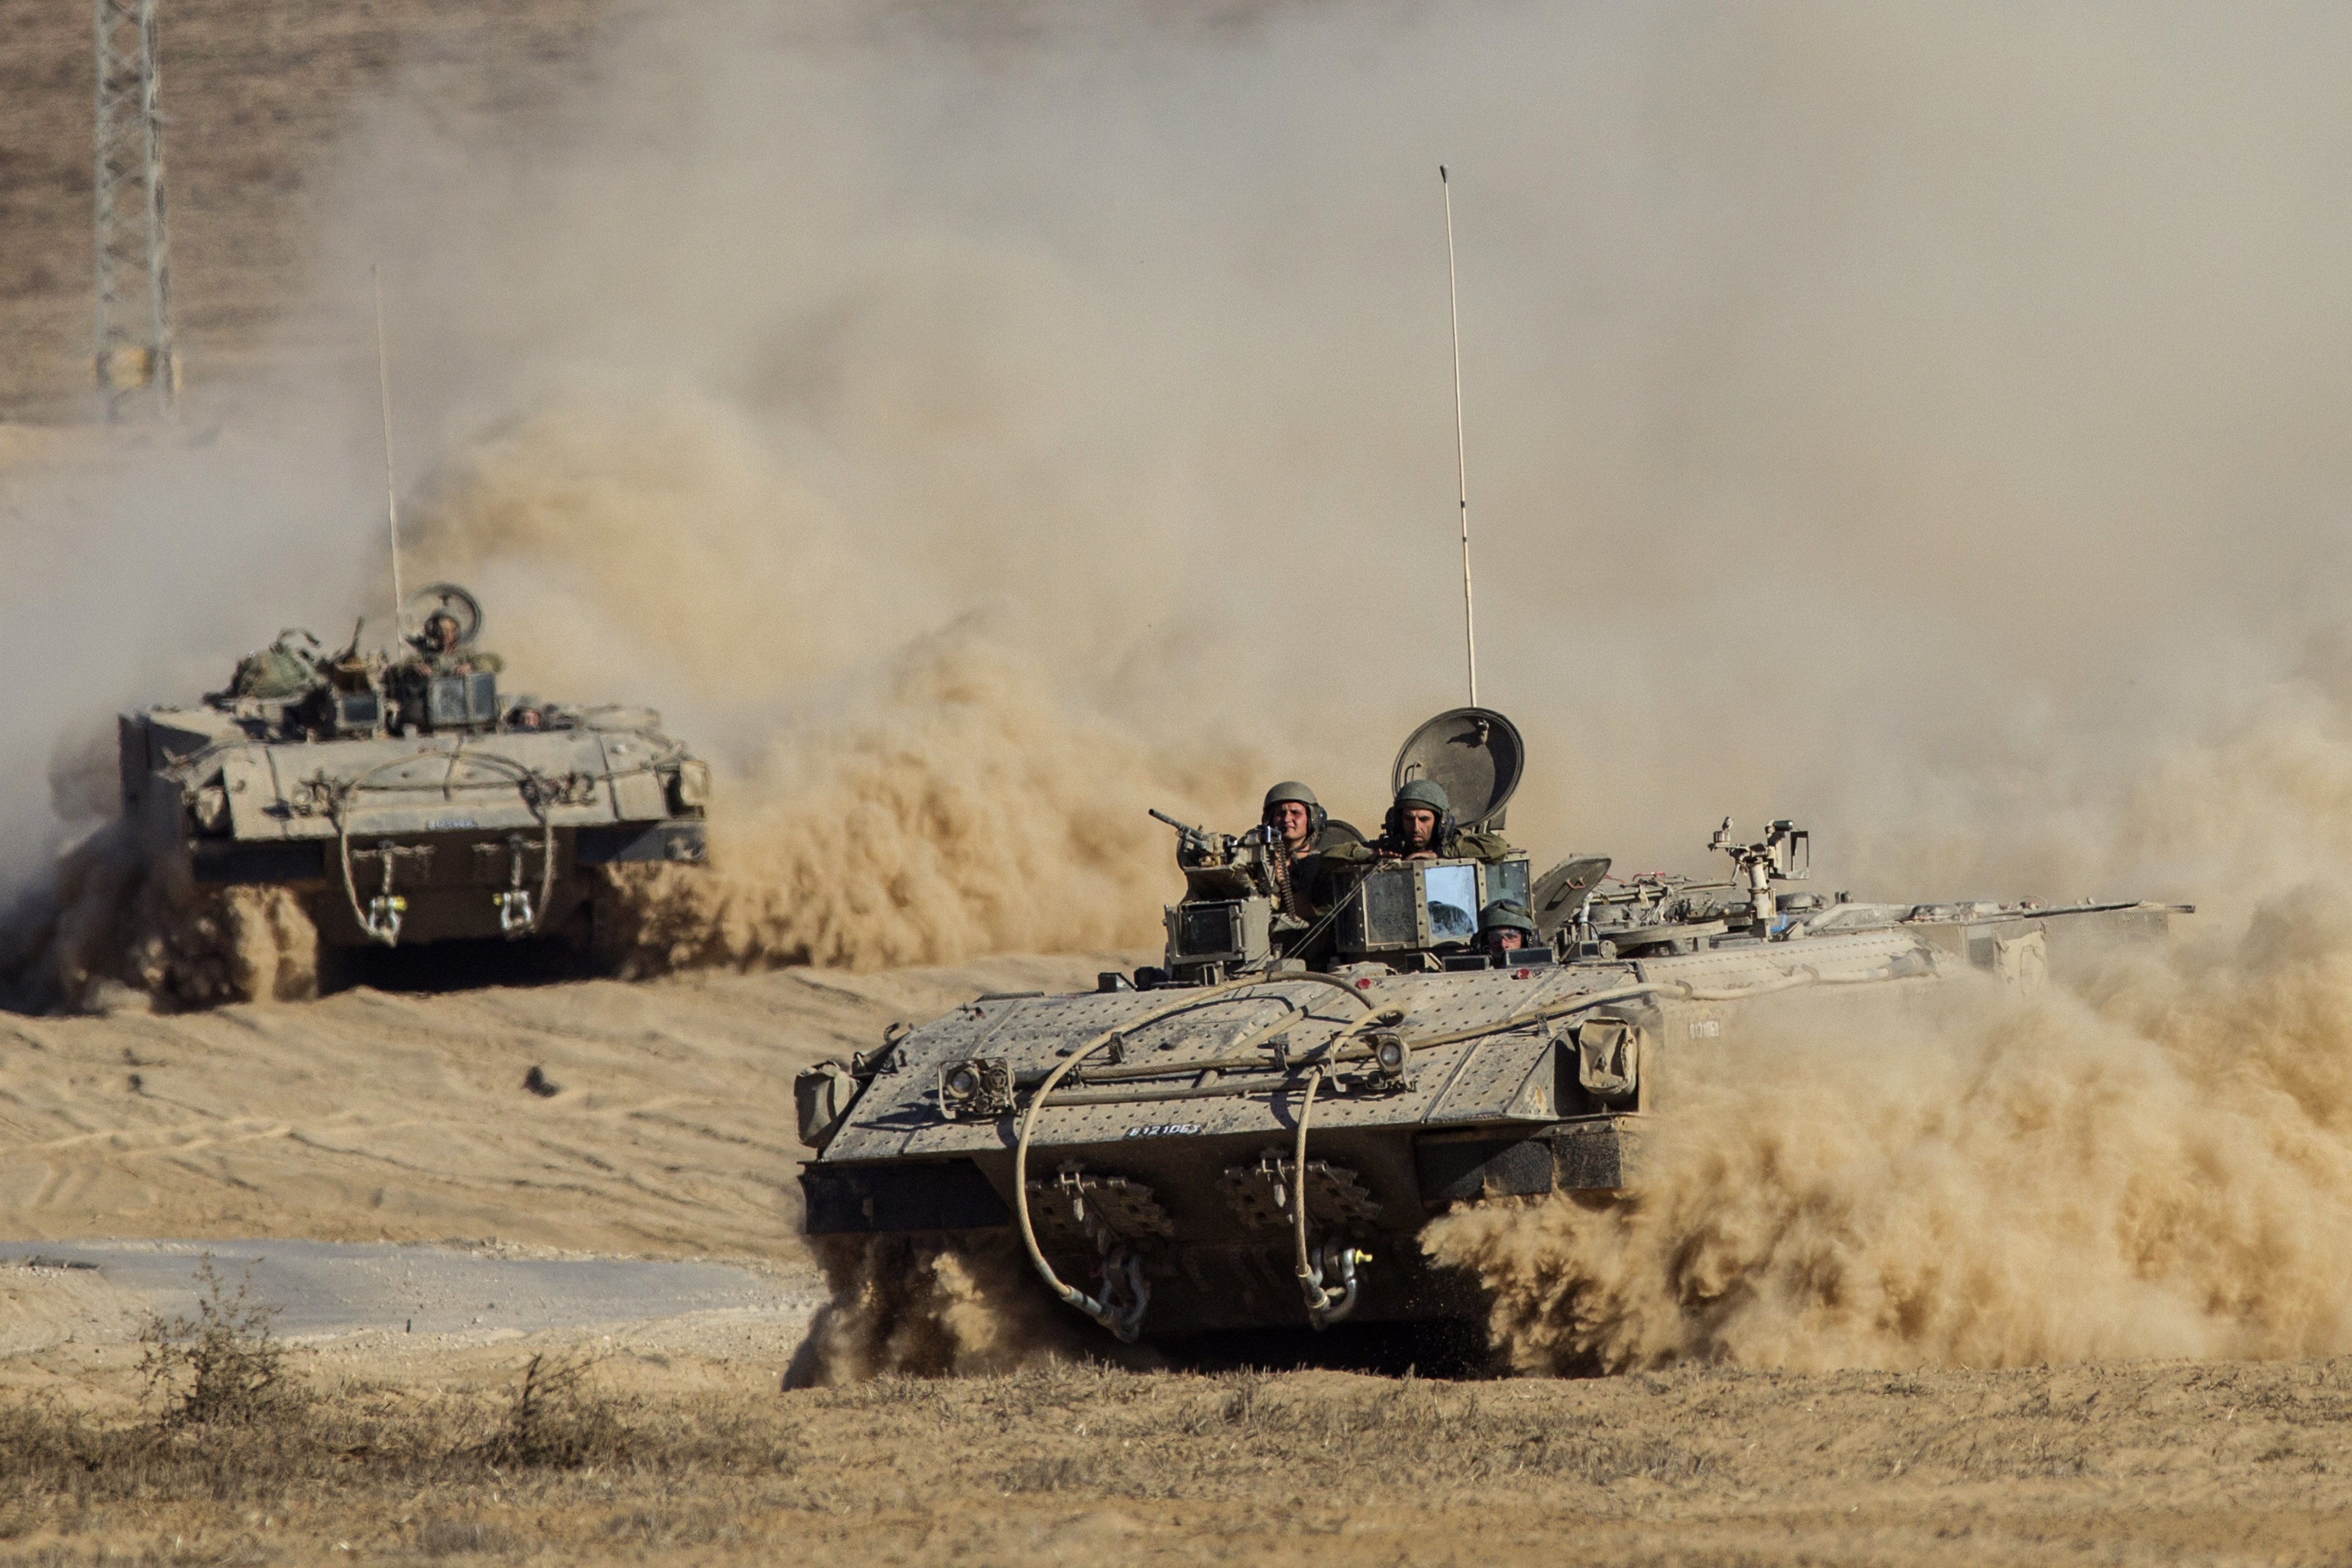 Israeli army armored personnel carriers (APC) move along Israel's border with the Gaza Strip on July 30, 2014. (JACK GUEZ—AFP/Getty Images)